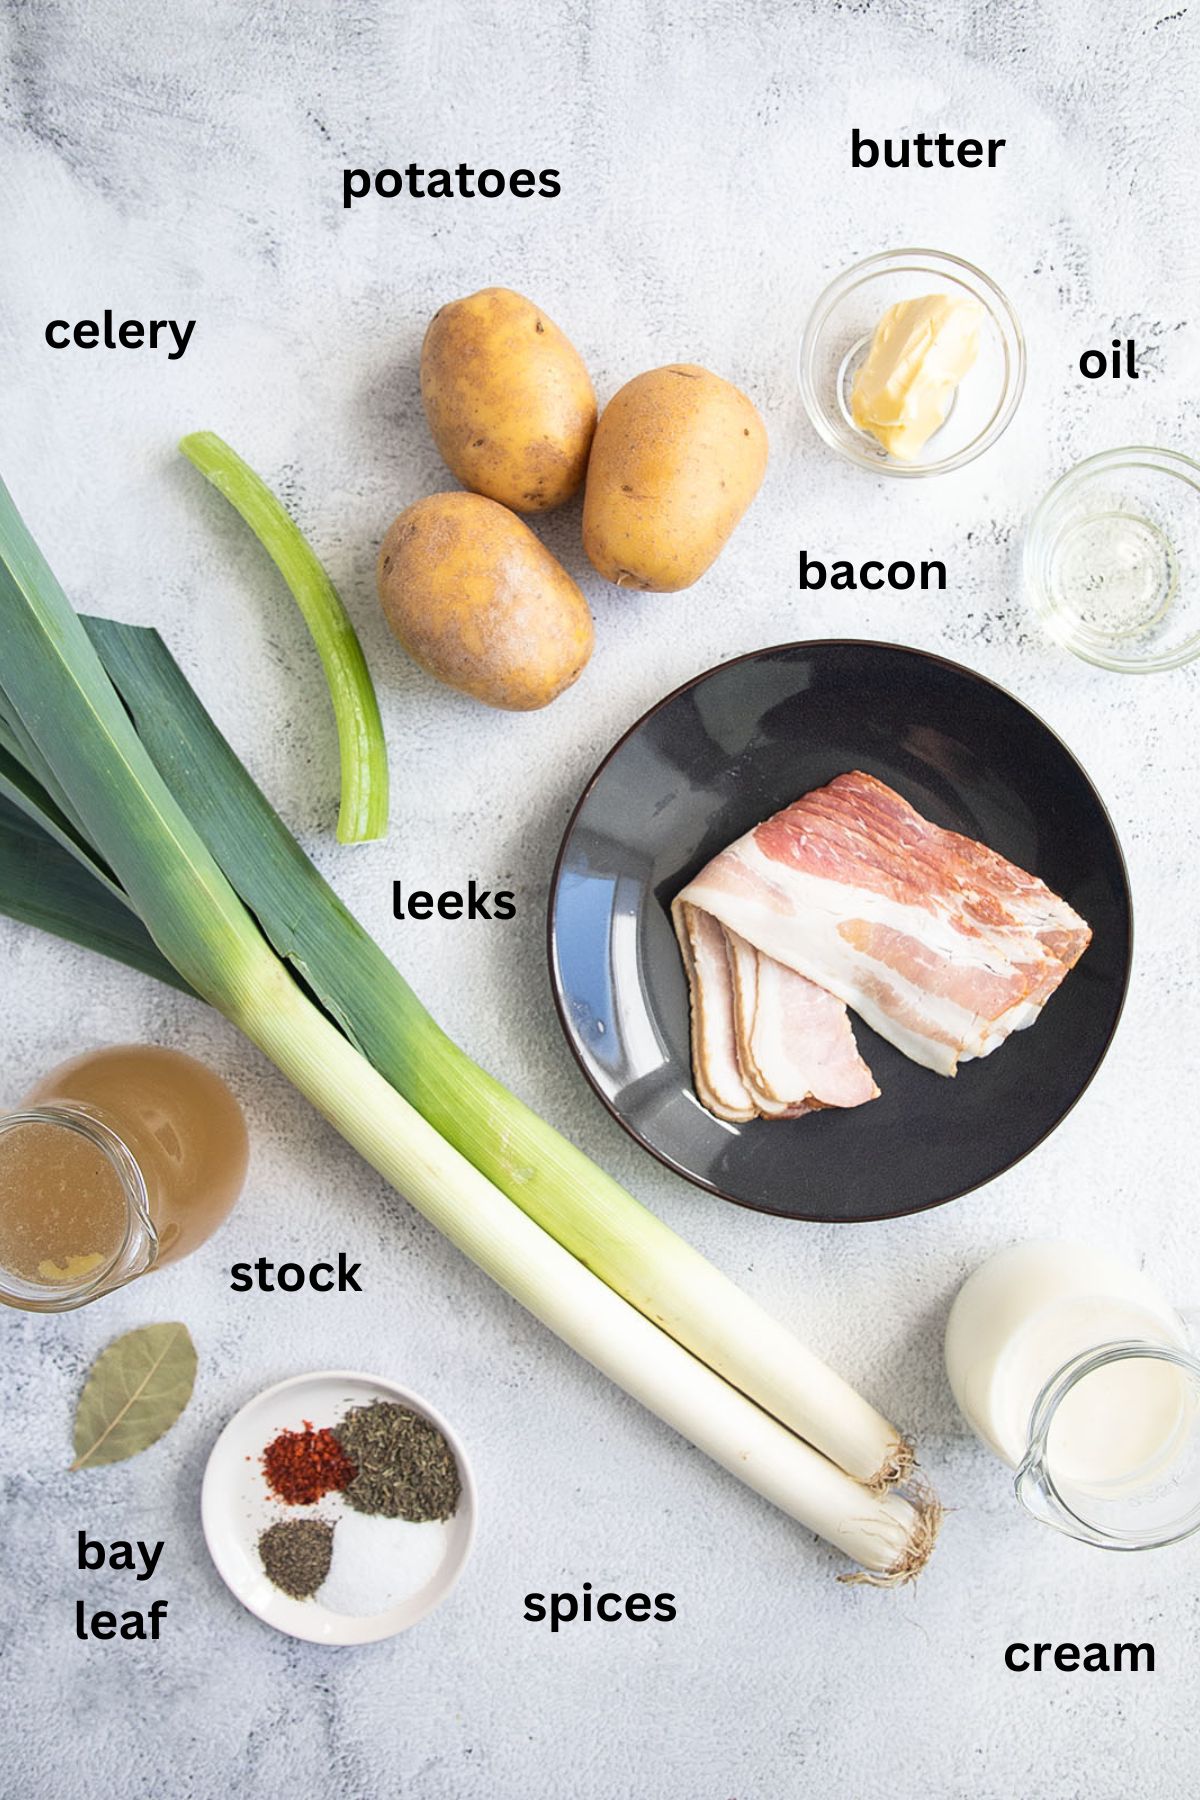 listed ingredients for making leek and potato soup with bacon arranged on the table.